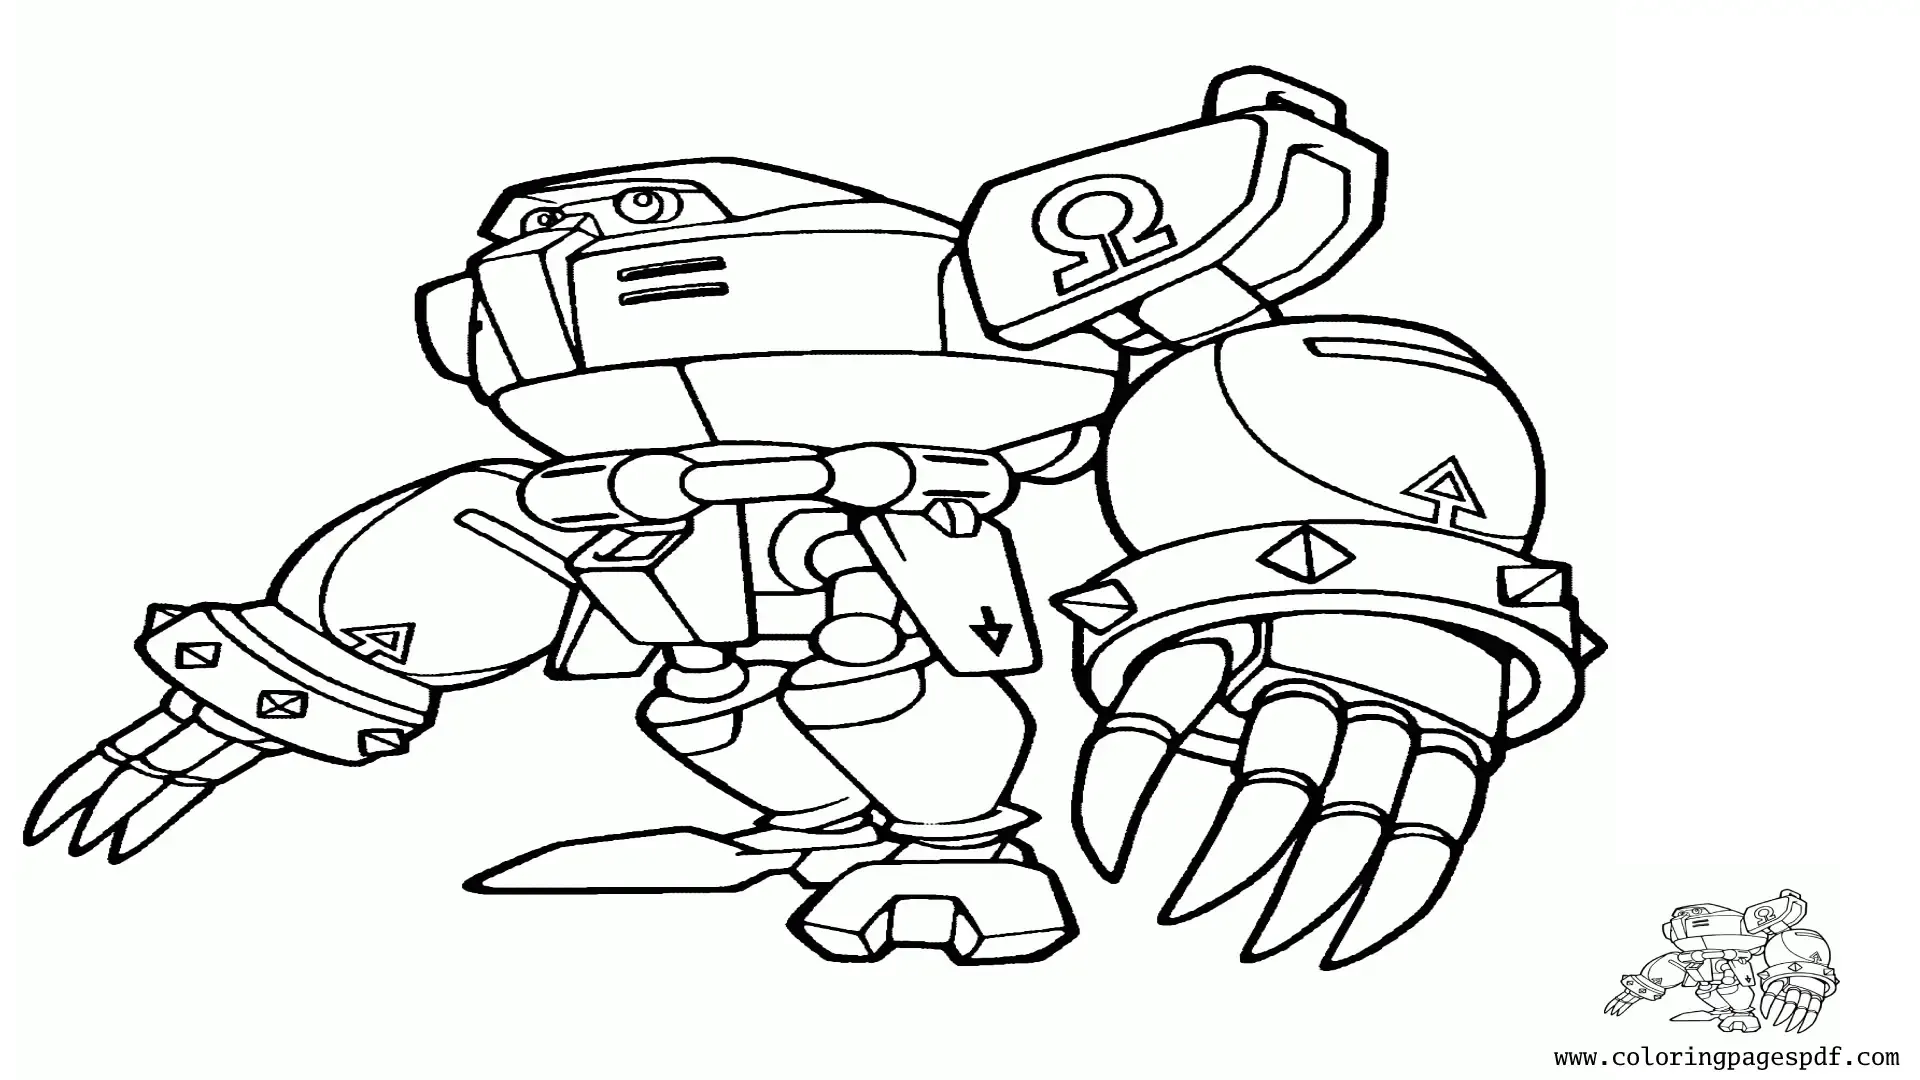 Coloring Page Of E-123 Omega